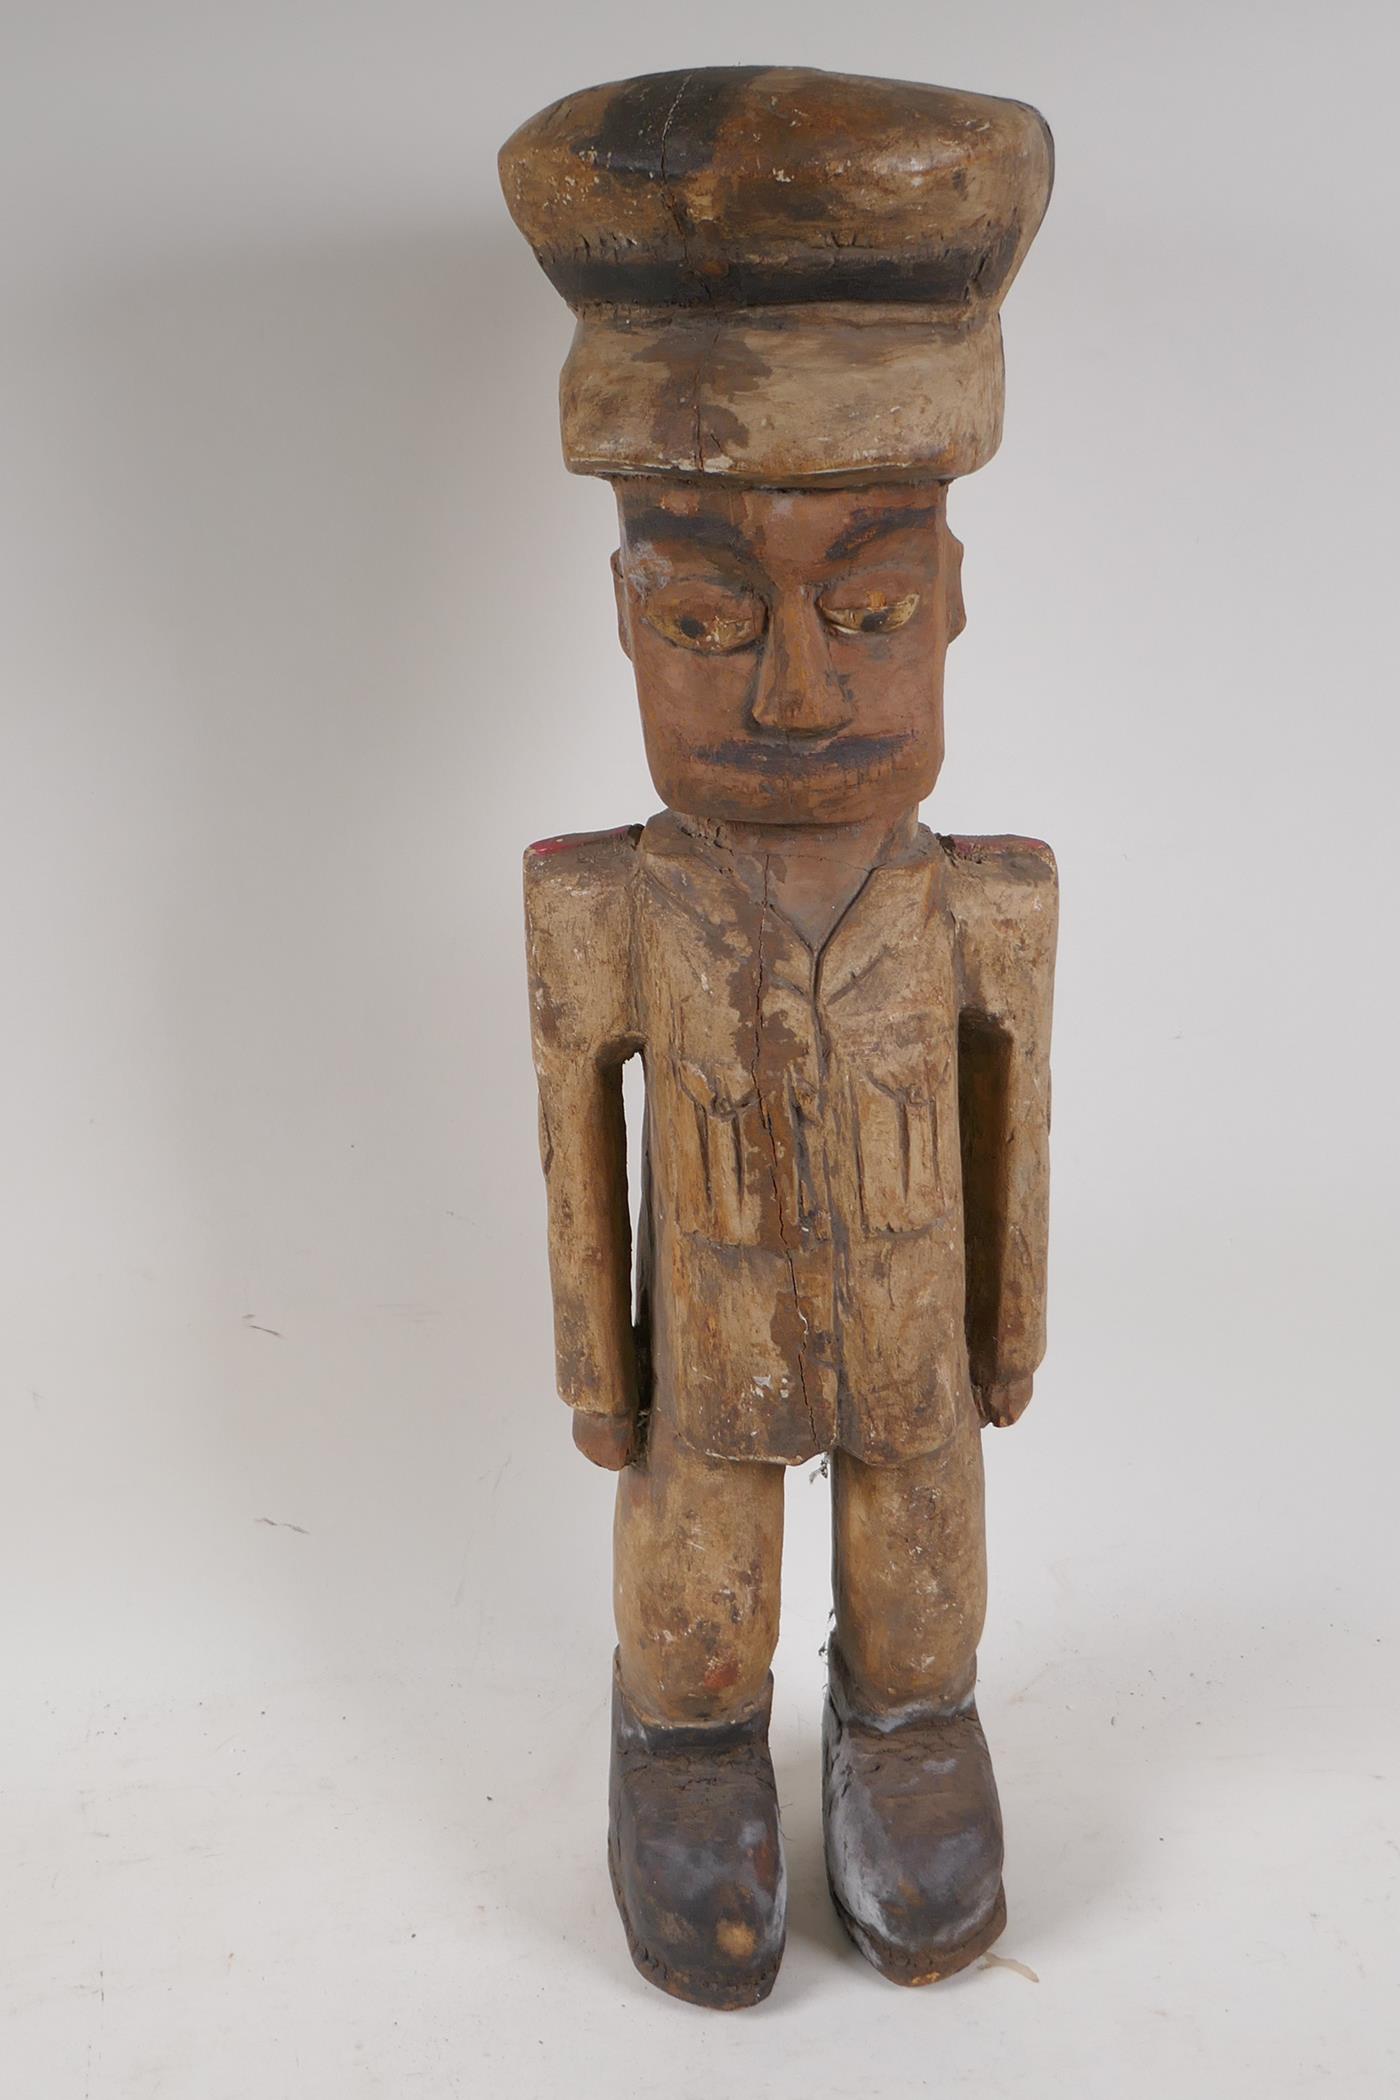 A carved wood figure of a soldier, 20" high